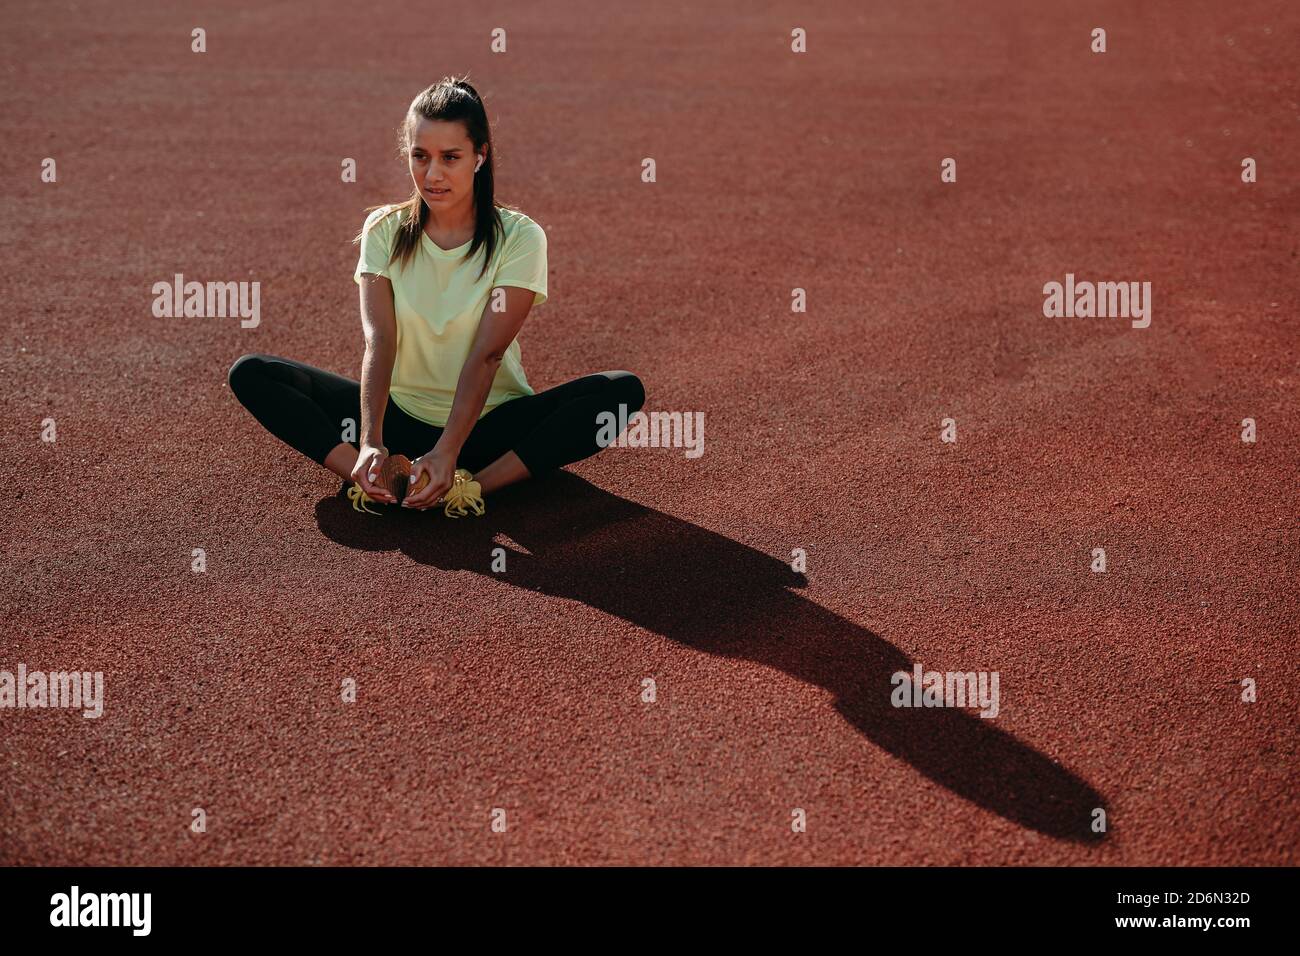 Charming brunette sitting on red court and stretching legs Stock Photo